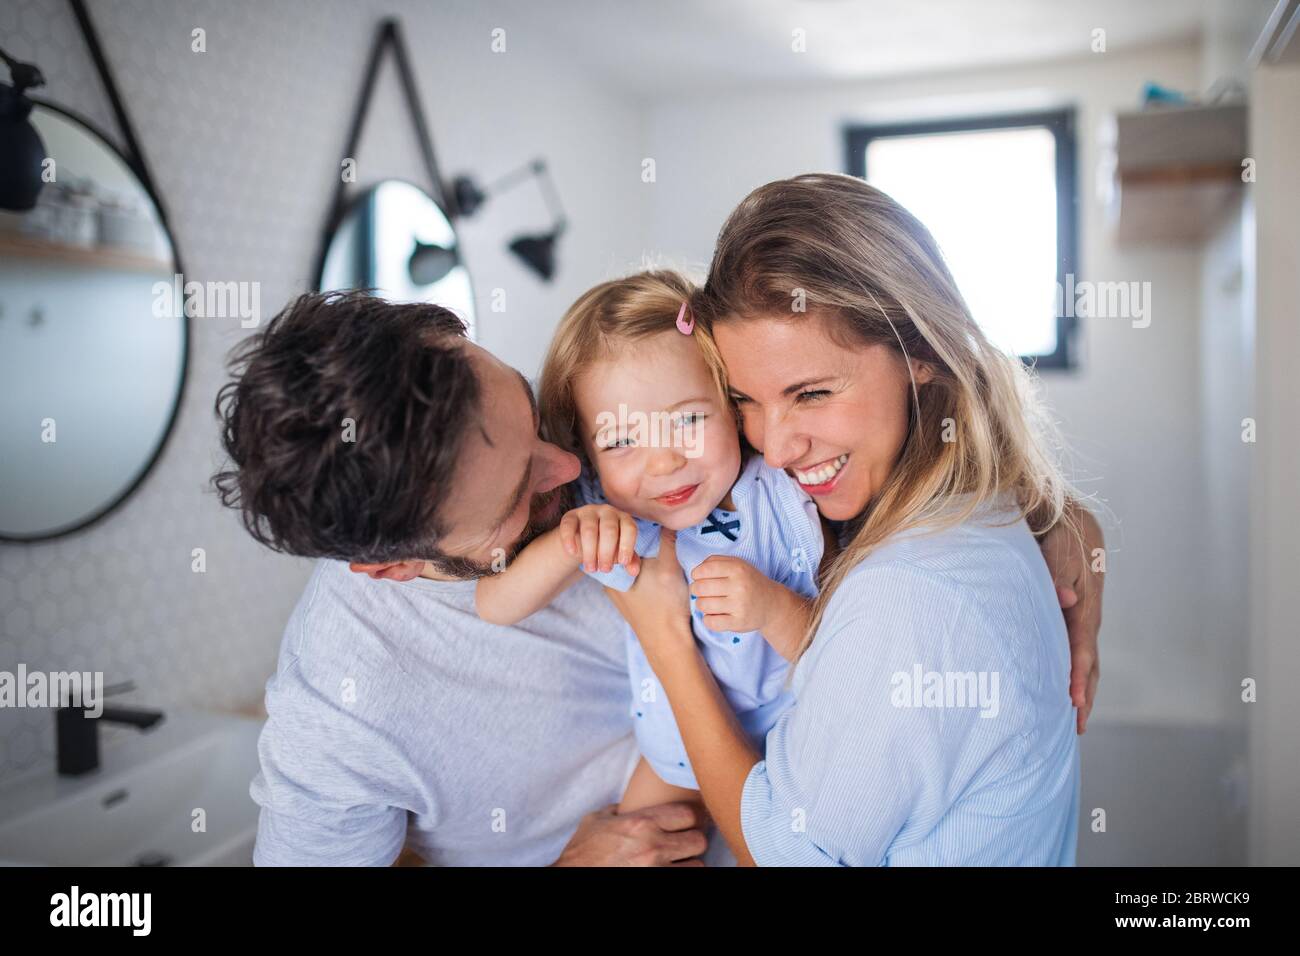 Young family with small daughter indoors in bathroom, hugging. Stock Photo